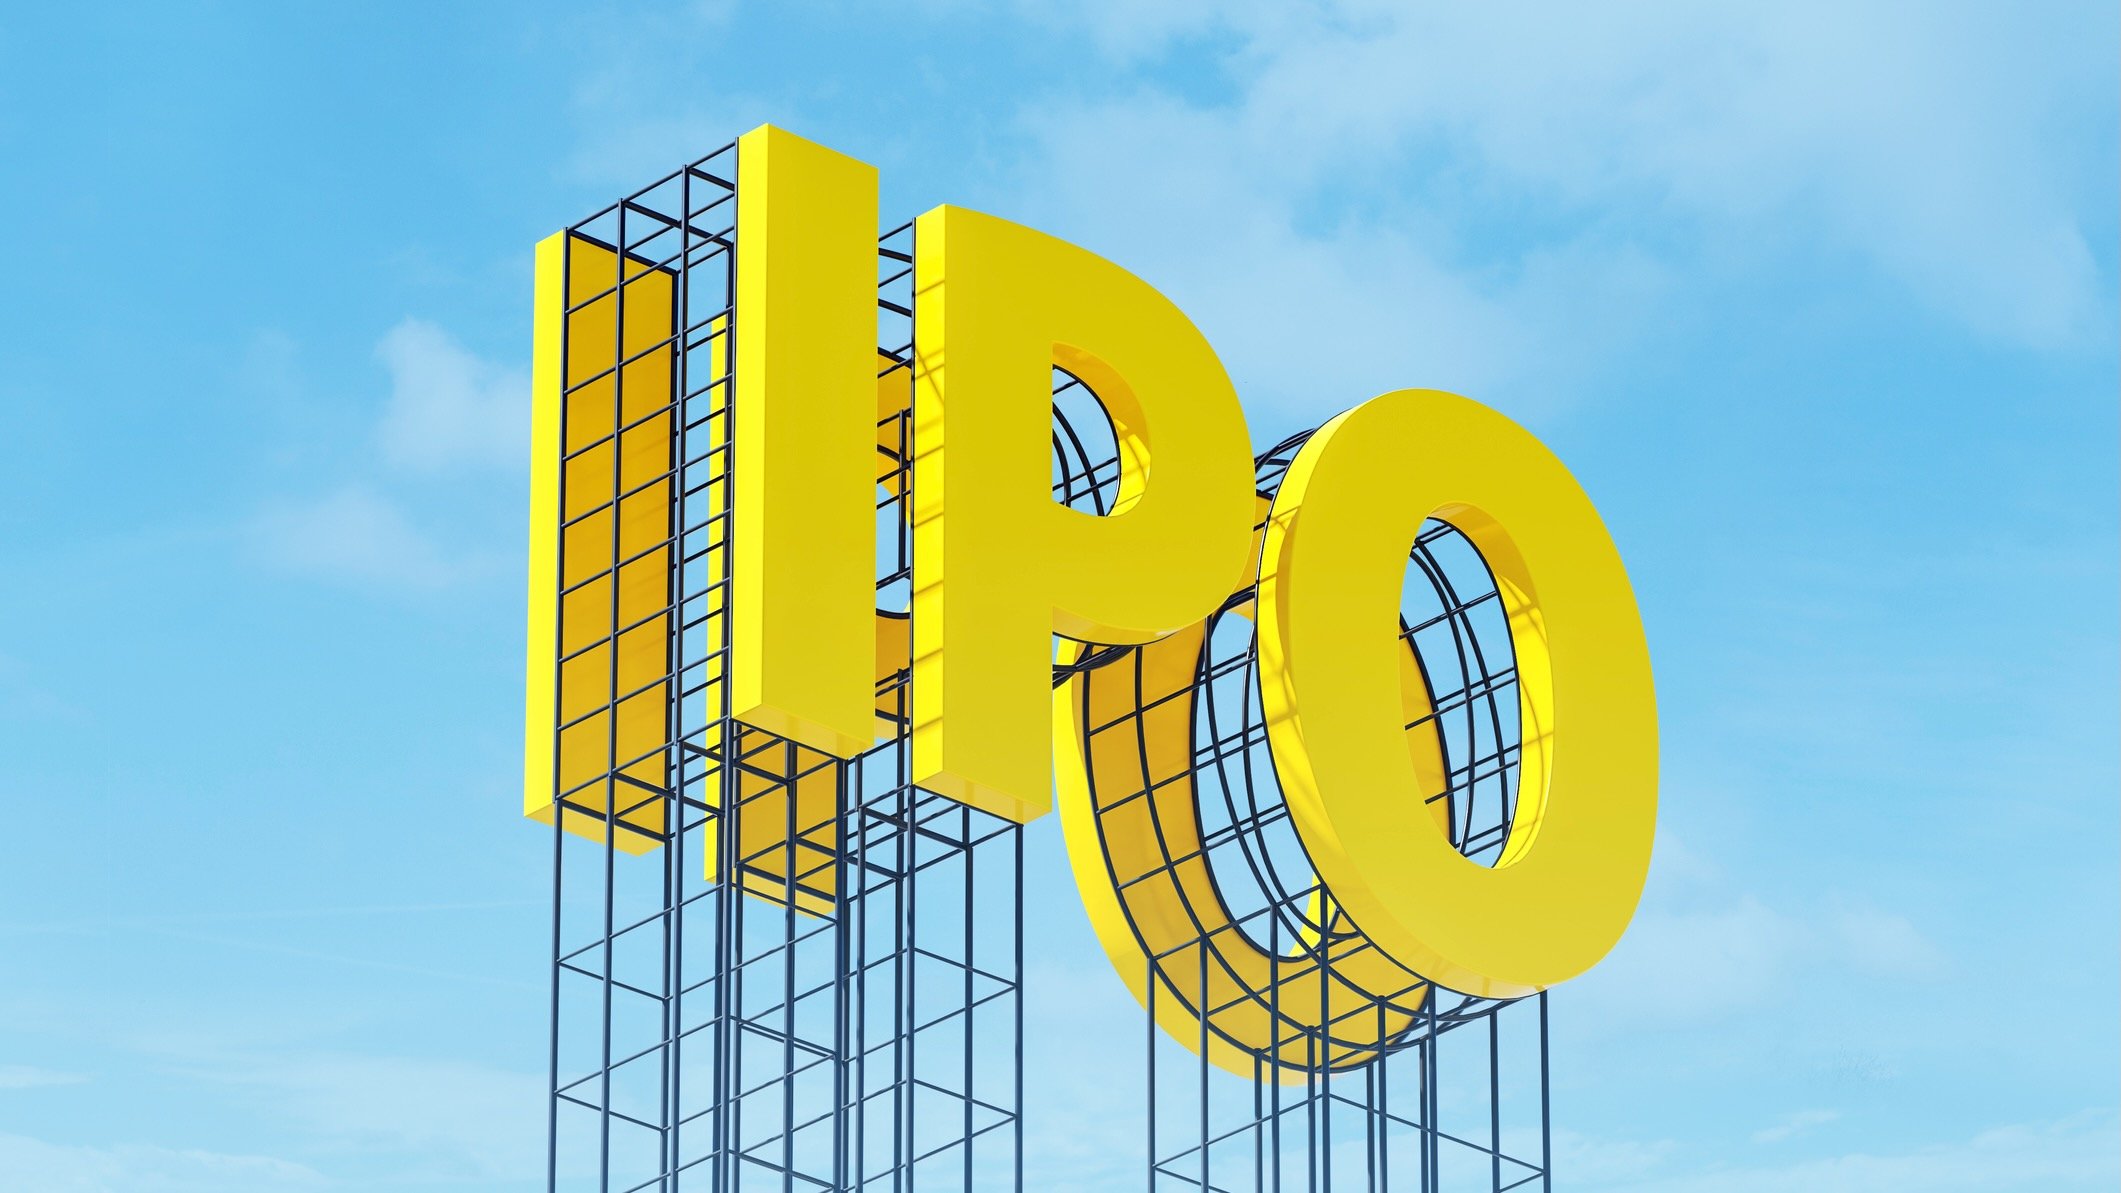 Yellow IPO sign against blue sky